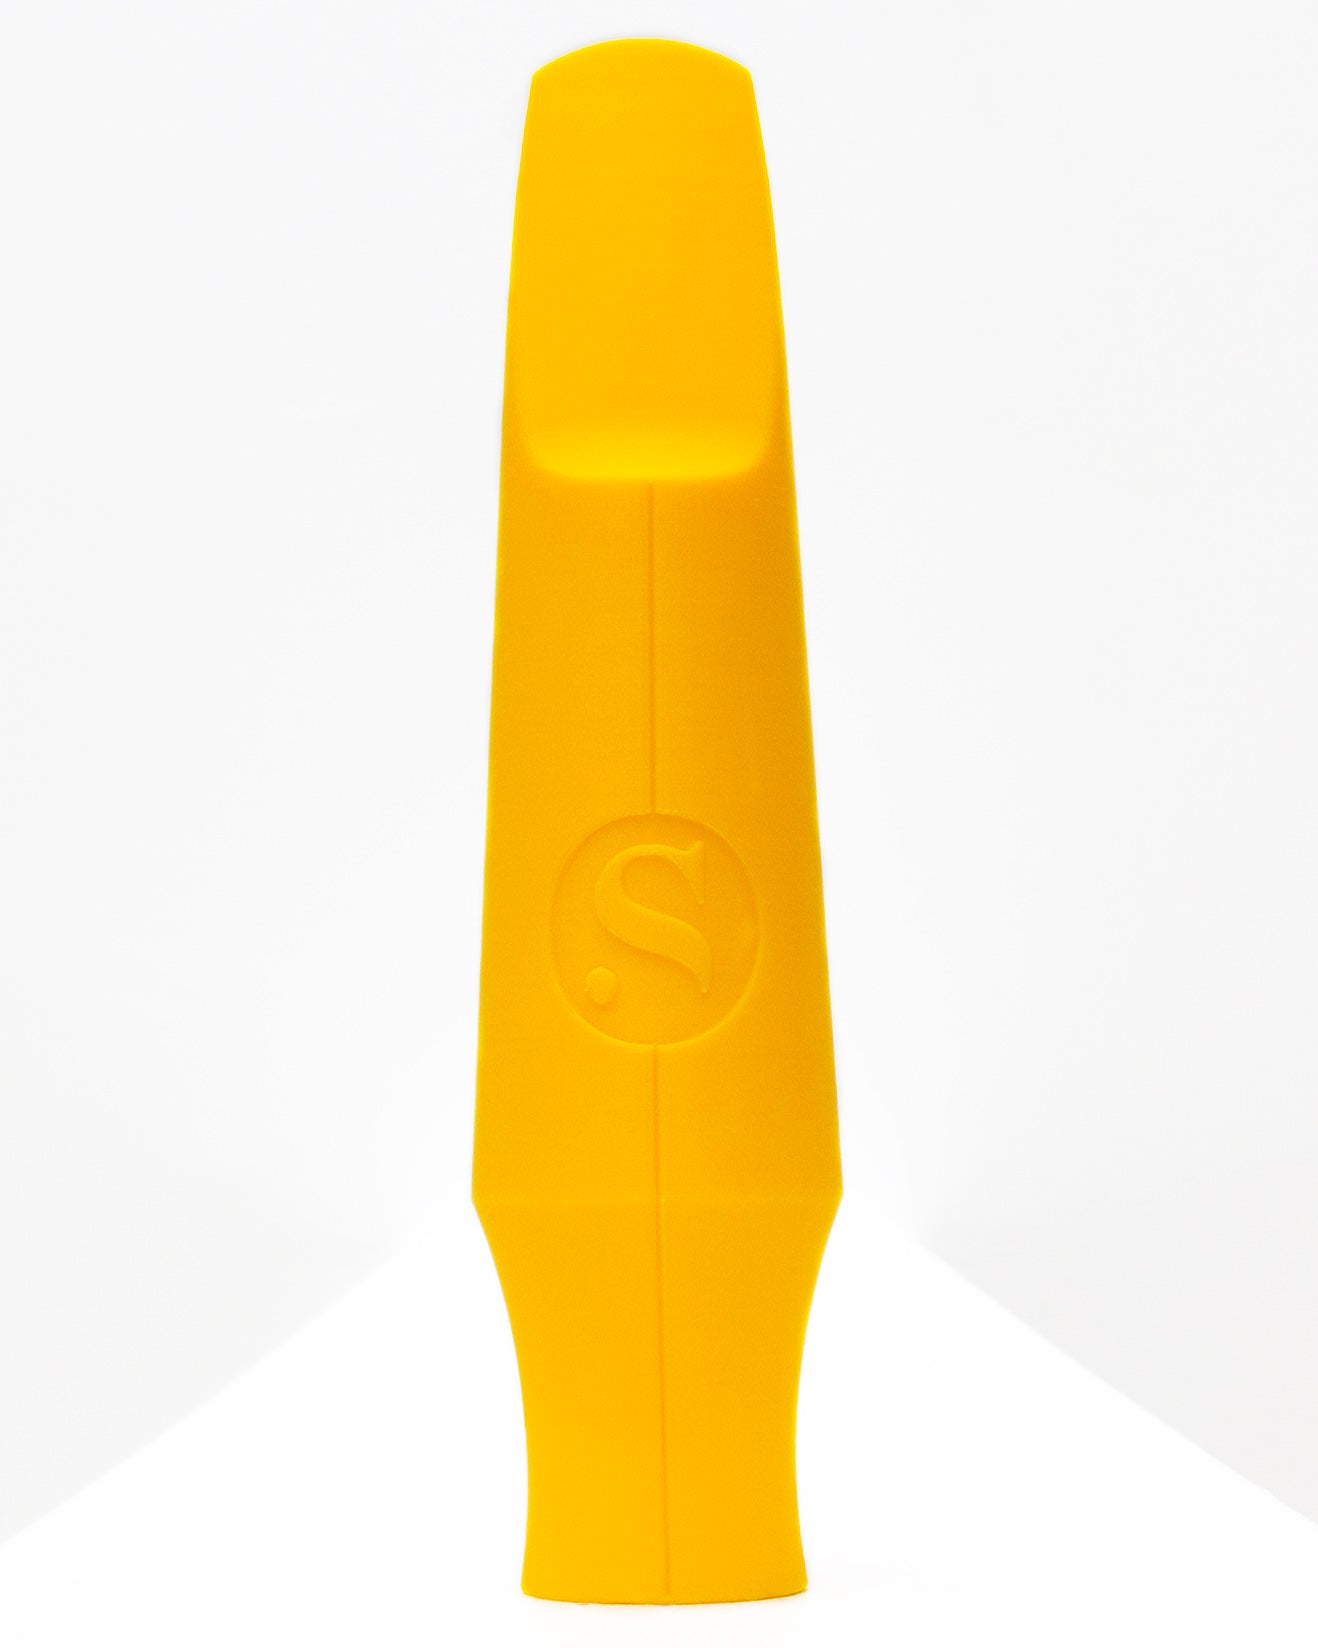 Bass Signature Saxophone mouthpiece - Michael Wilbur by Syos - 9 / Mellow Yellow